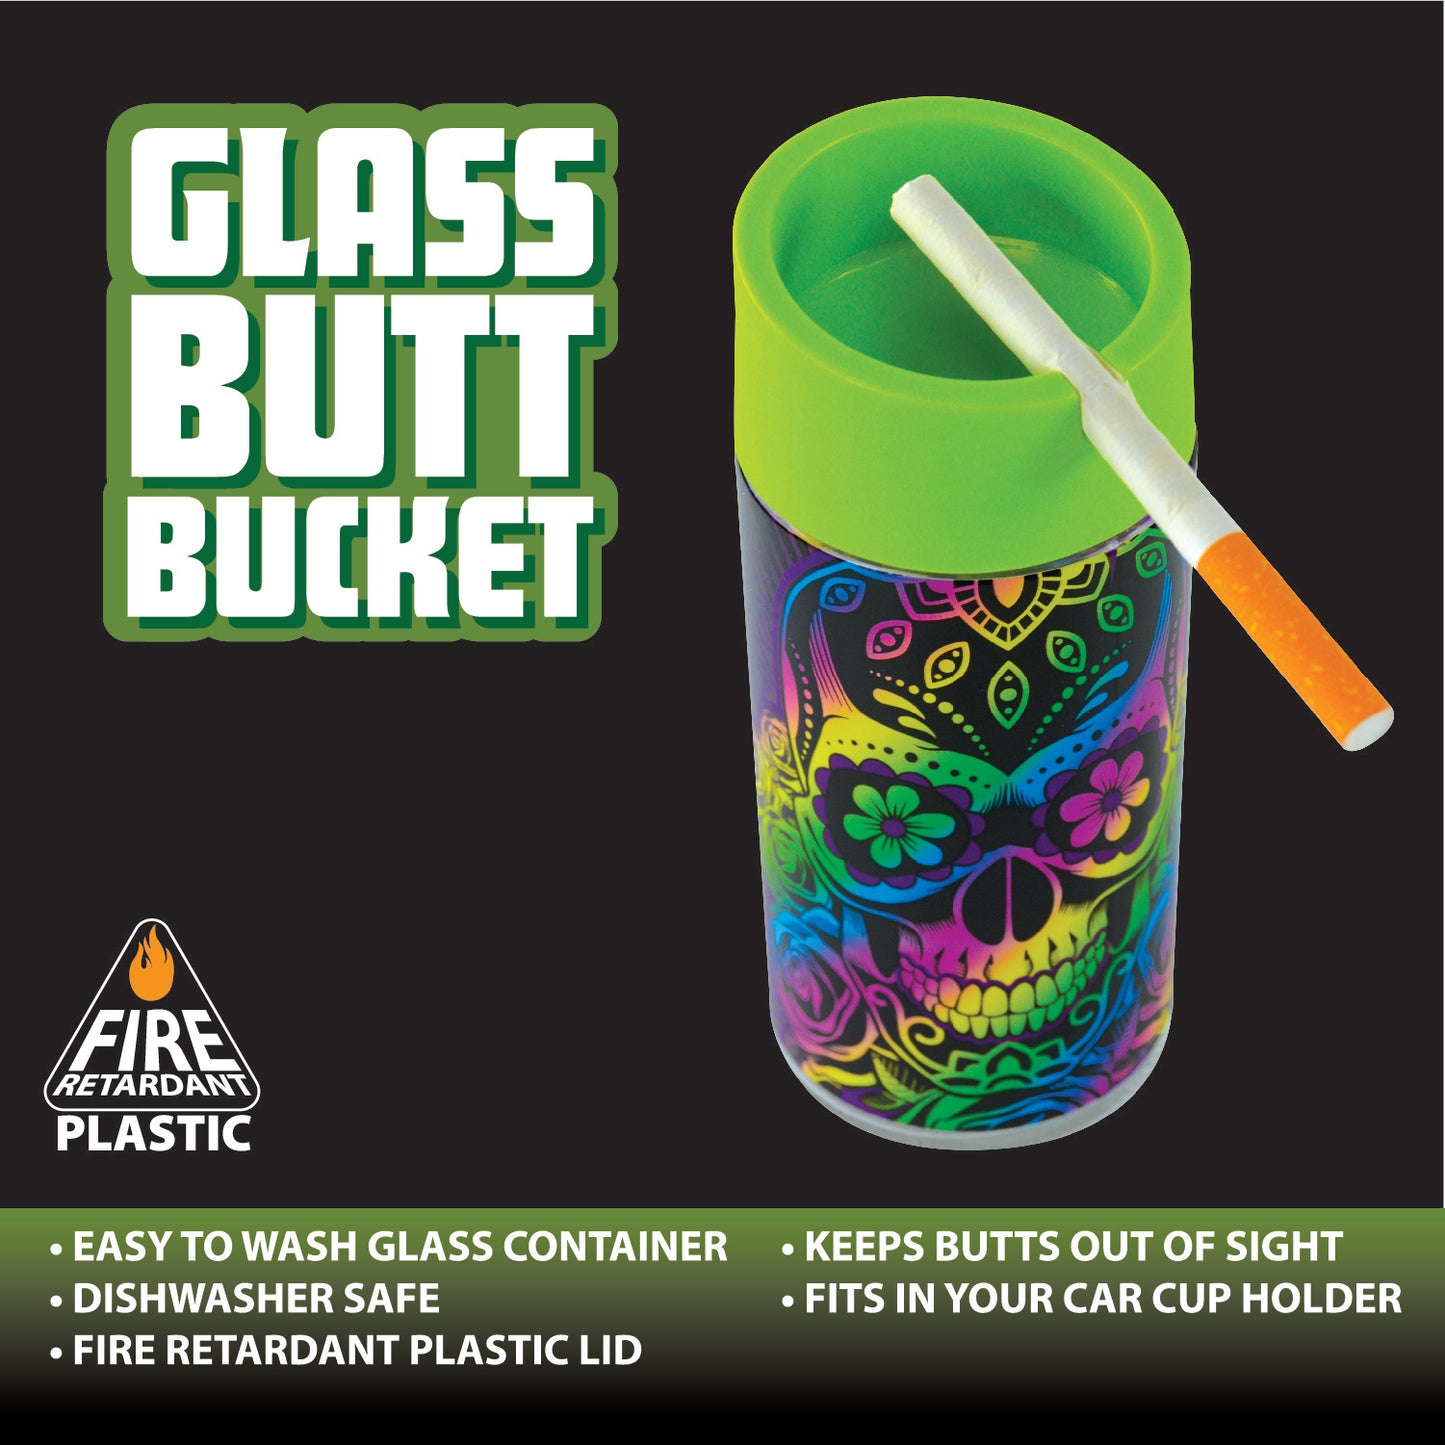 ITEM NUMBER 026636 GLASS BUTT BUCKET 6 PIECES PER DISPLAY